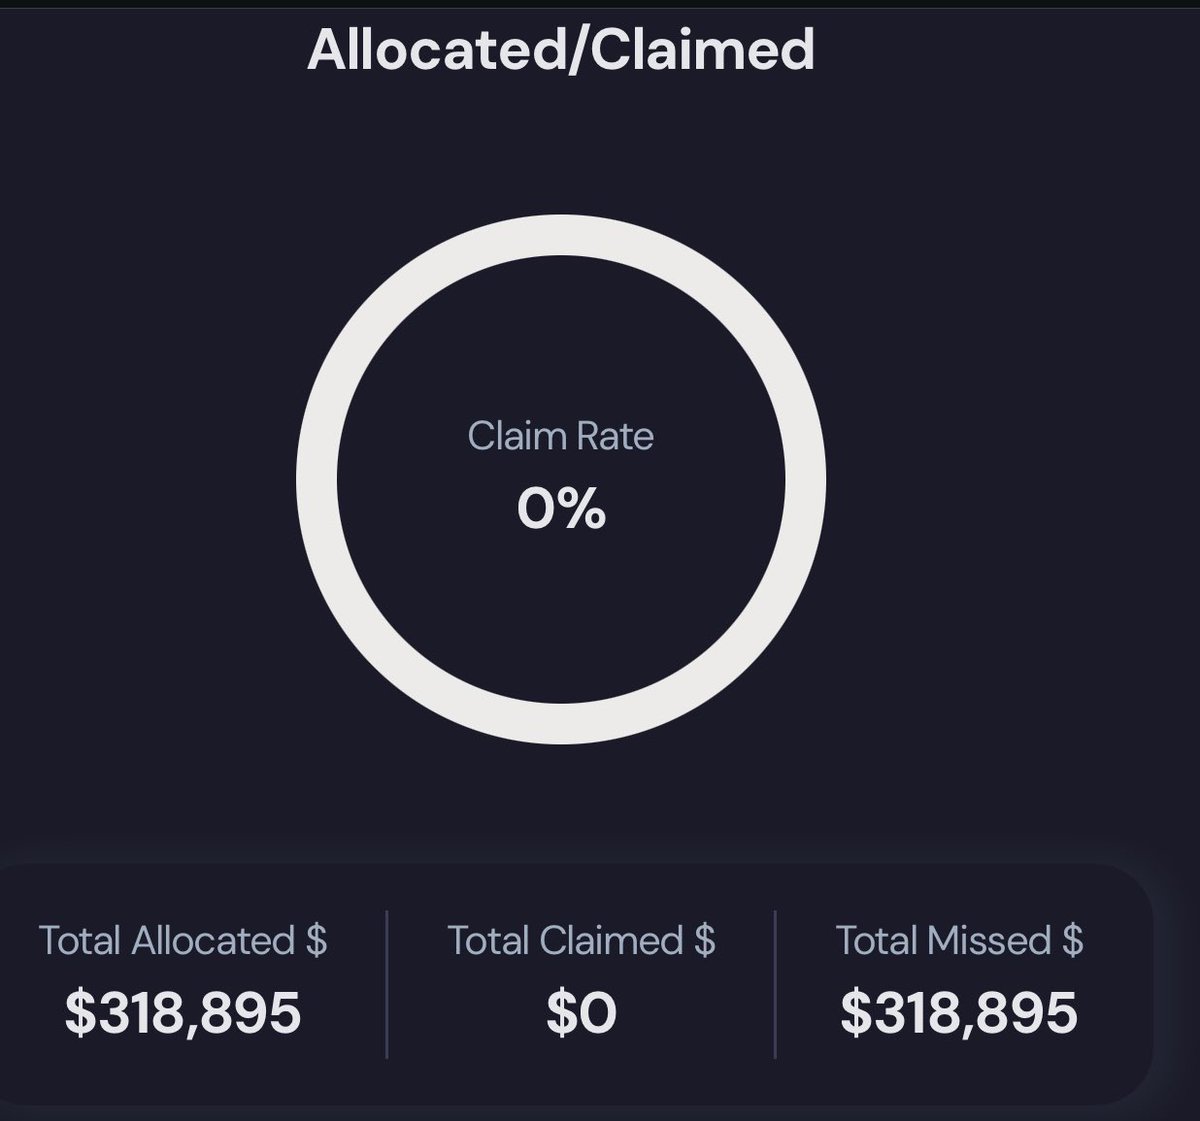 Airdrops are all the rage, and somehow $ATOM still flies under the radar. Let’s give a different perspective: staking just 200 ATOM since January '21 could have netted you 500% ROI—and that's not even including $DYM yet. As more airdrops roll out, this could really climb…